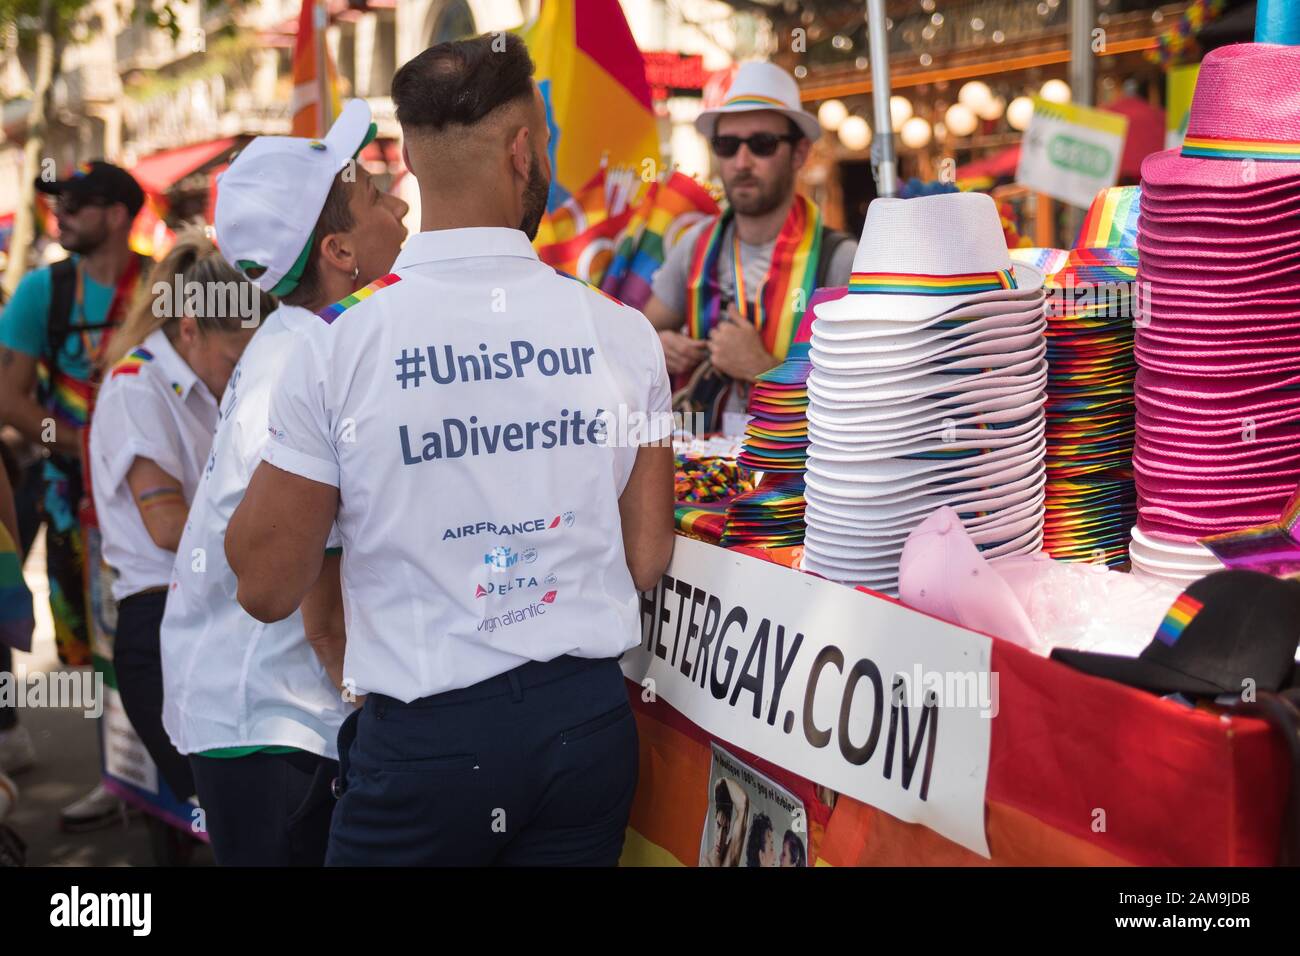 June 29 2019, Paris, France. Gay Pride Parade Day. Man in front of a stand wearing a t-shirt saying '#united for diversity (unis pour la diversité). Stock Photo